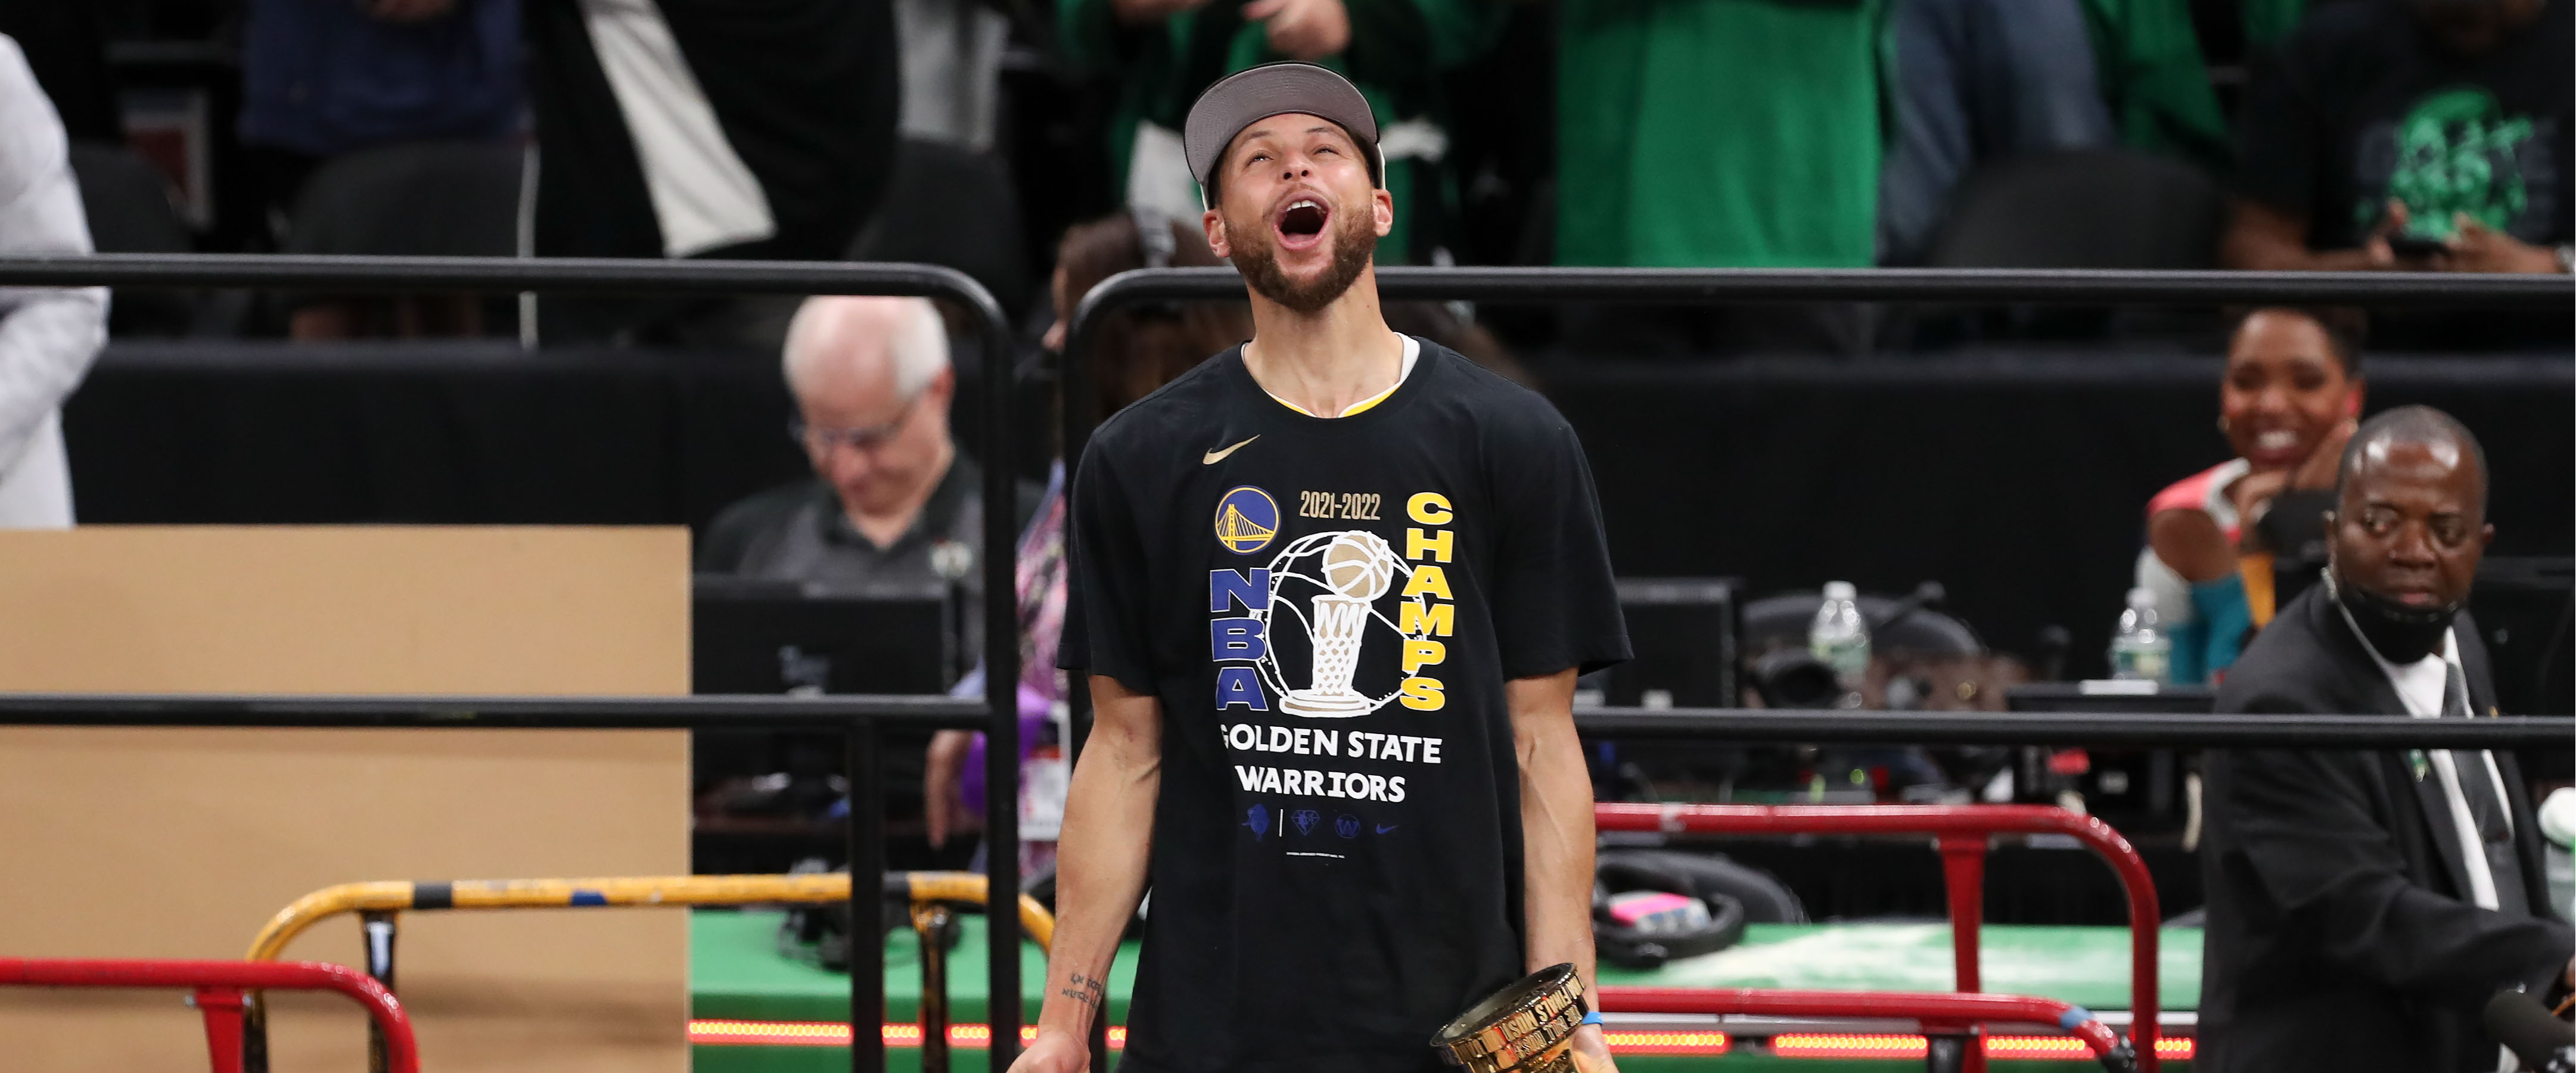 Stephen Curry just solidified his spot as one of the NBA's all-time greats